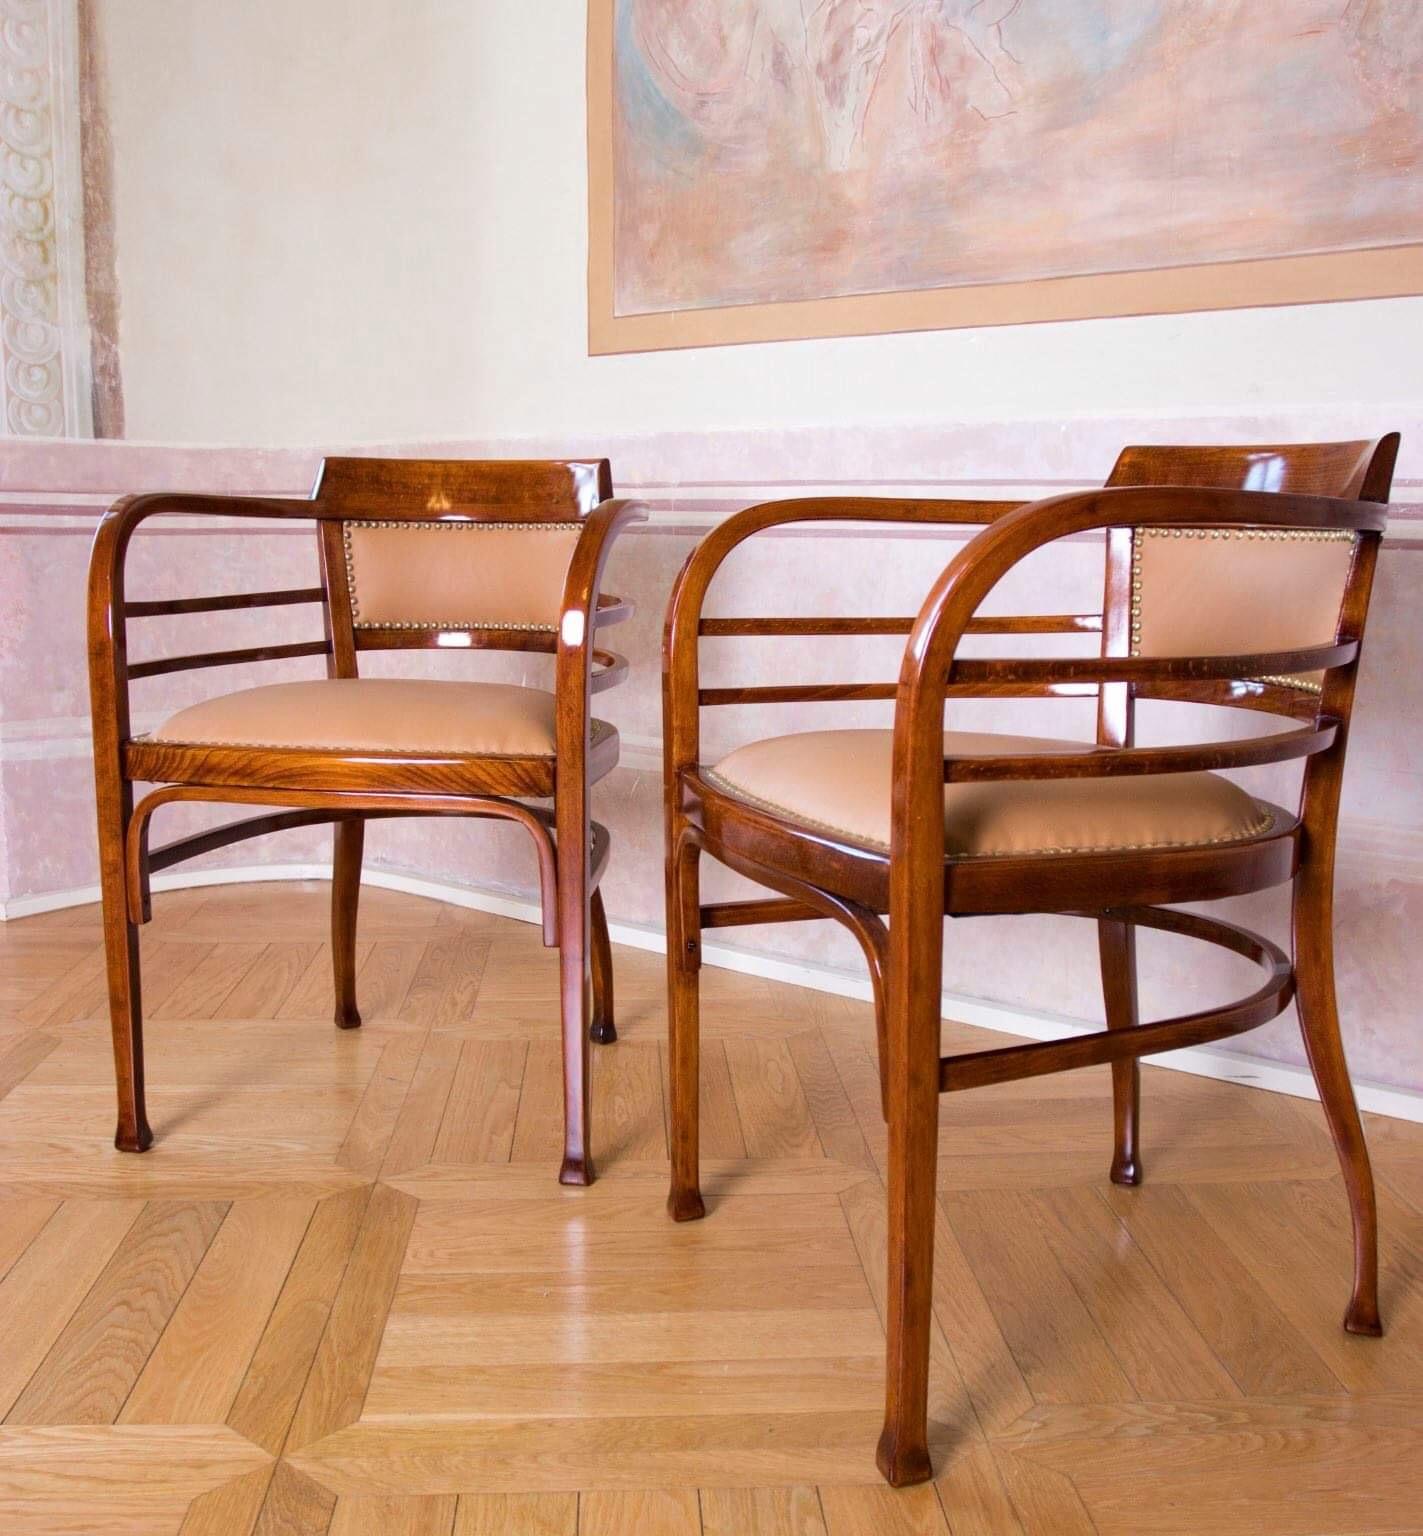 Wien Secession Thonet Coffee Set Attributed to Otto Wagner Designer For Sale 1